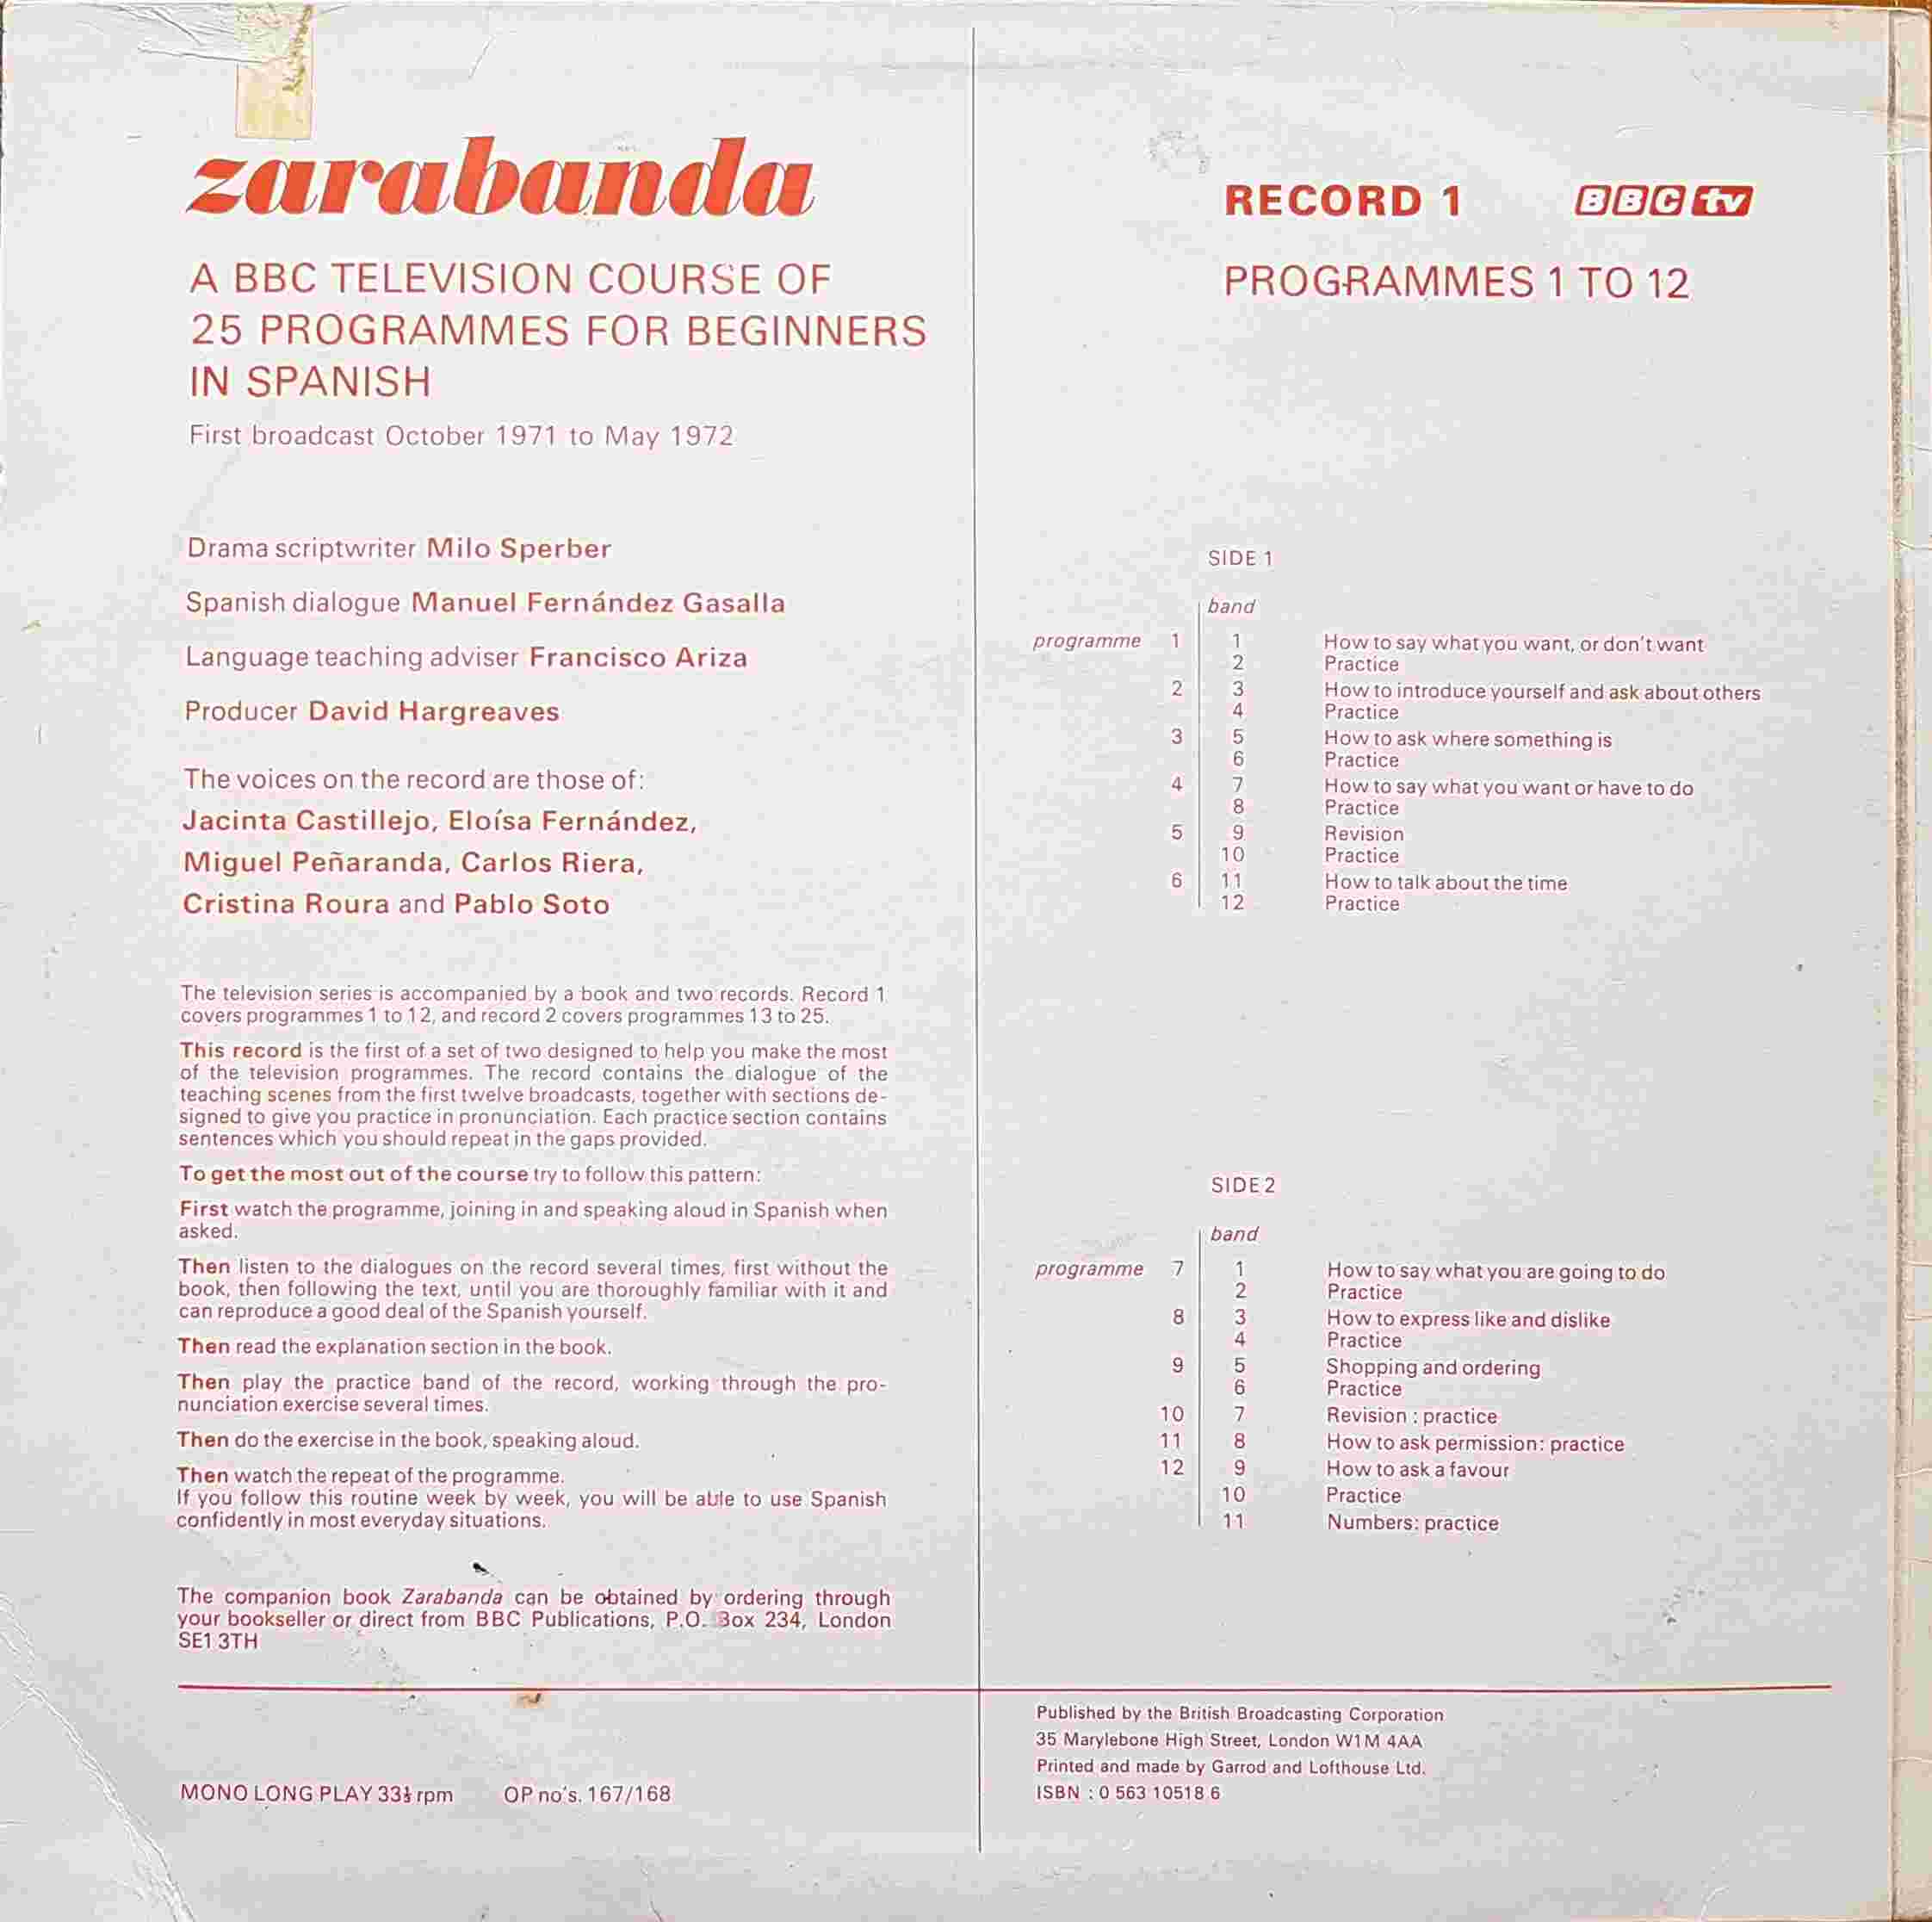 Picture of OP 167/168 Zarabanda - A BBC Television course of 25 programmes for beginners in Spanish - Record 1 - Programmes 1 - 12 by artist Milo Sperber / Manuel Fernandez Gasalla from the BBC records and Tapes library